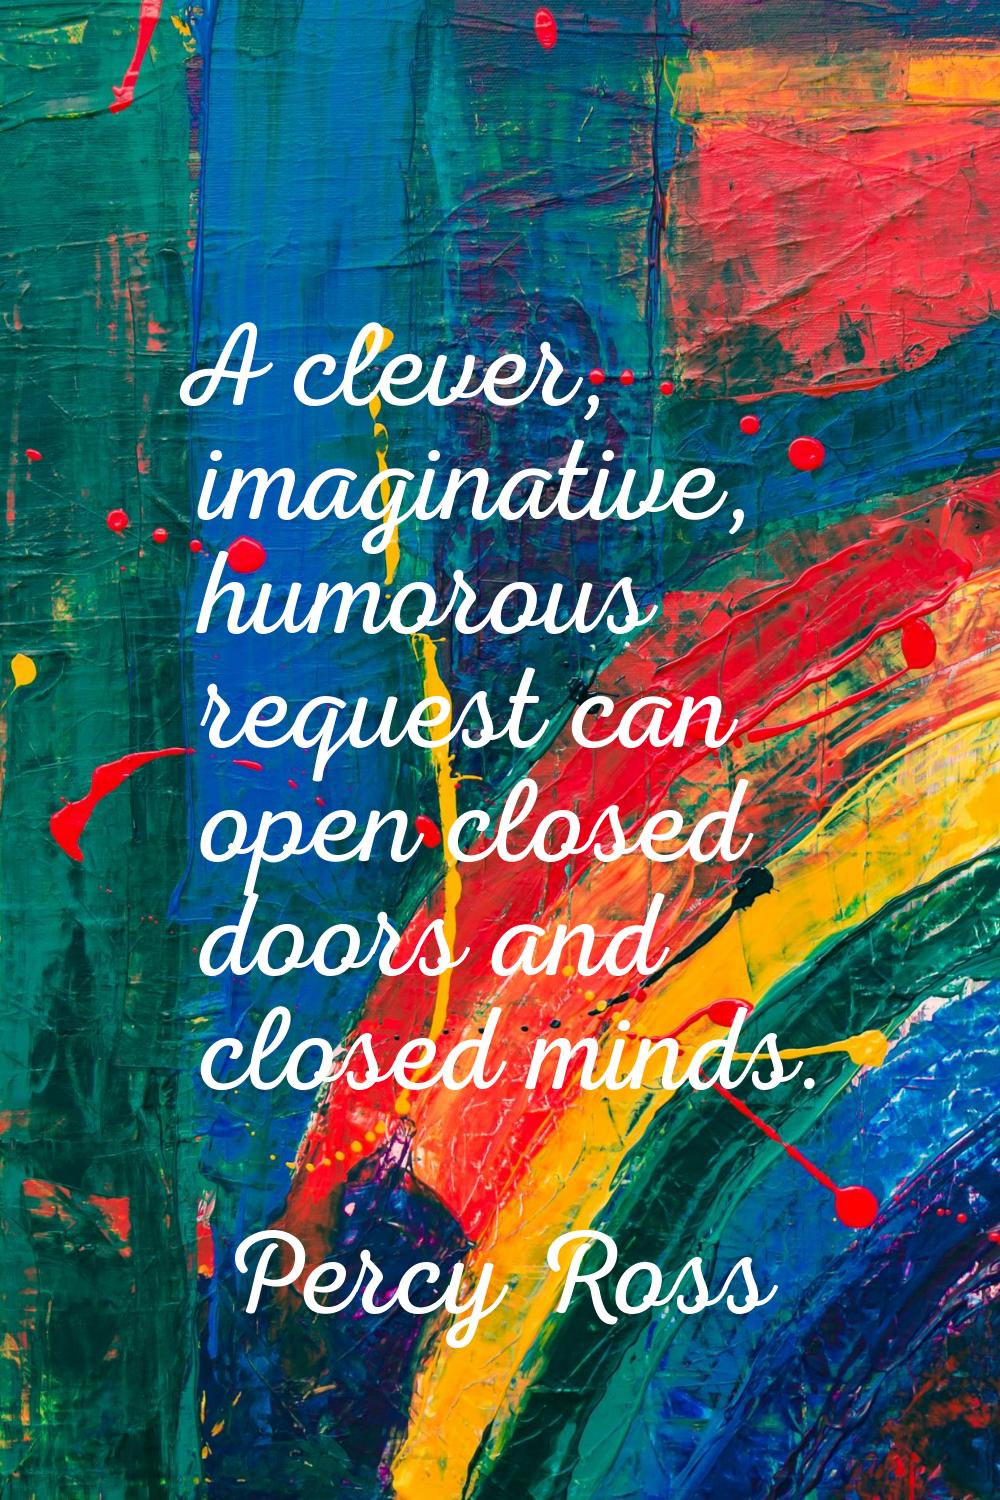 A clever, imaginative, humorous request can open closed doors and closed minds.